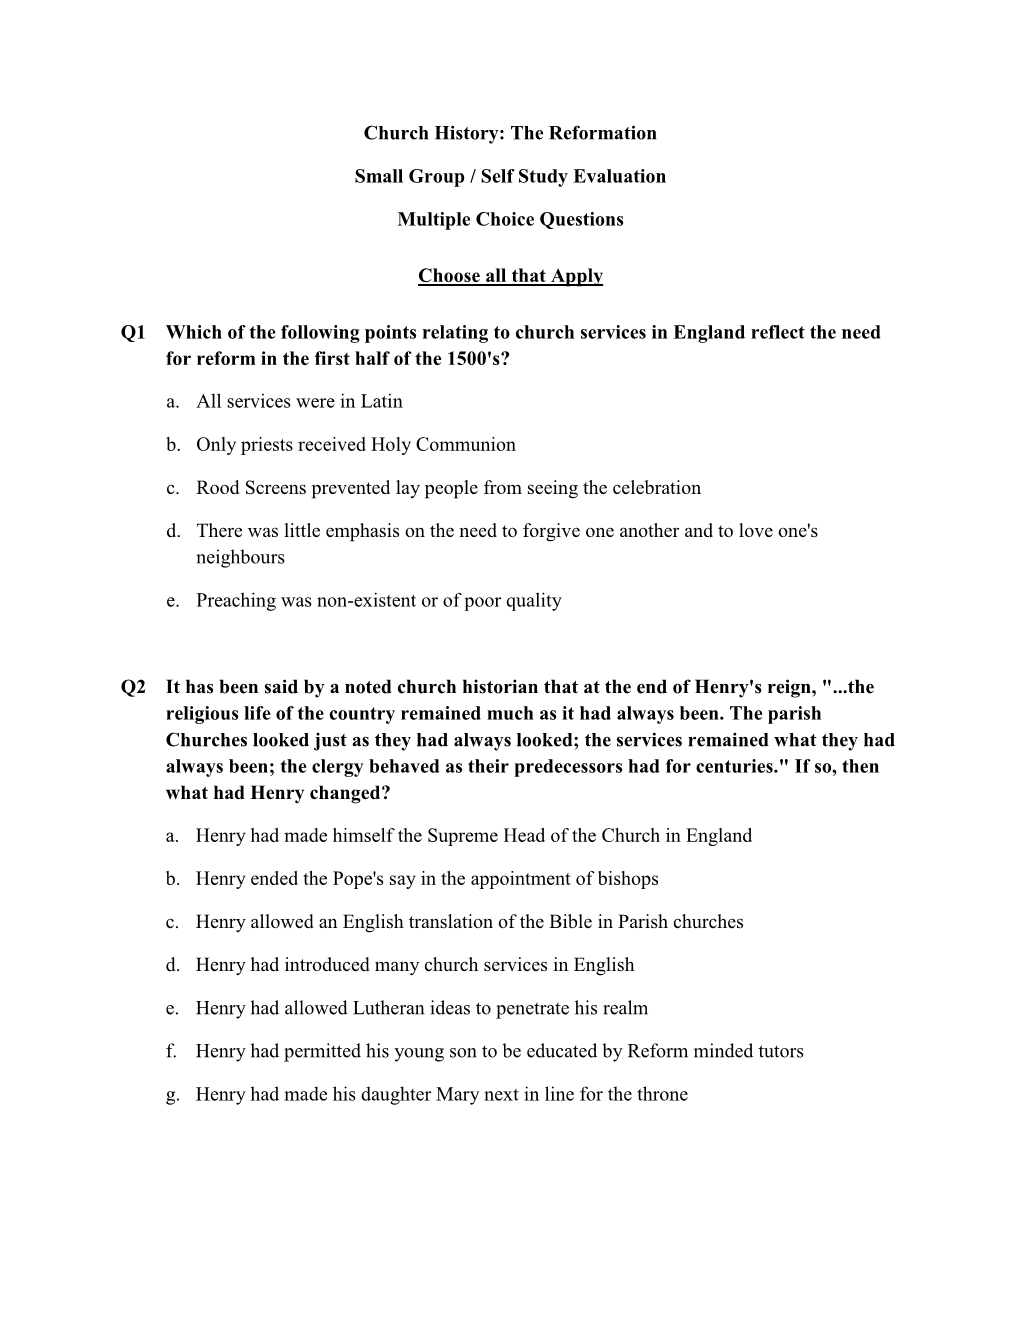 Church History: the Reformation Small Group / Self Study Evaluation